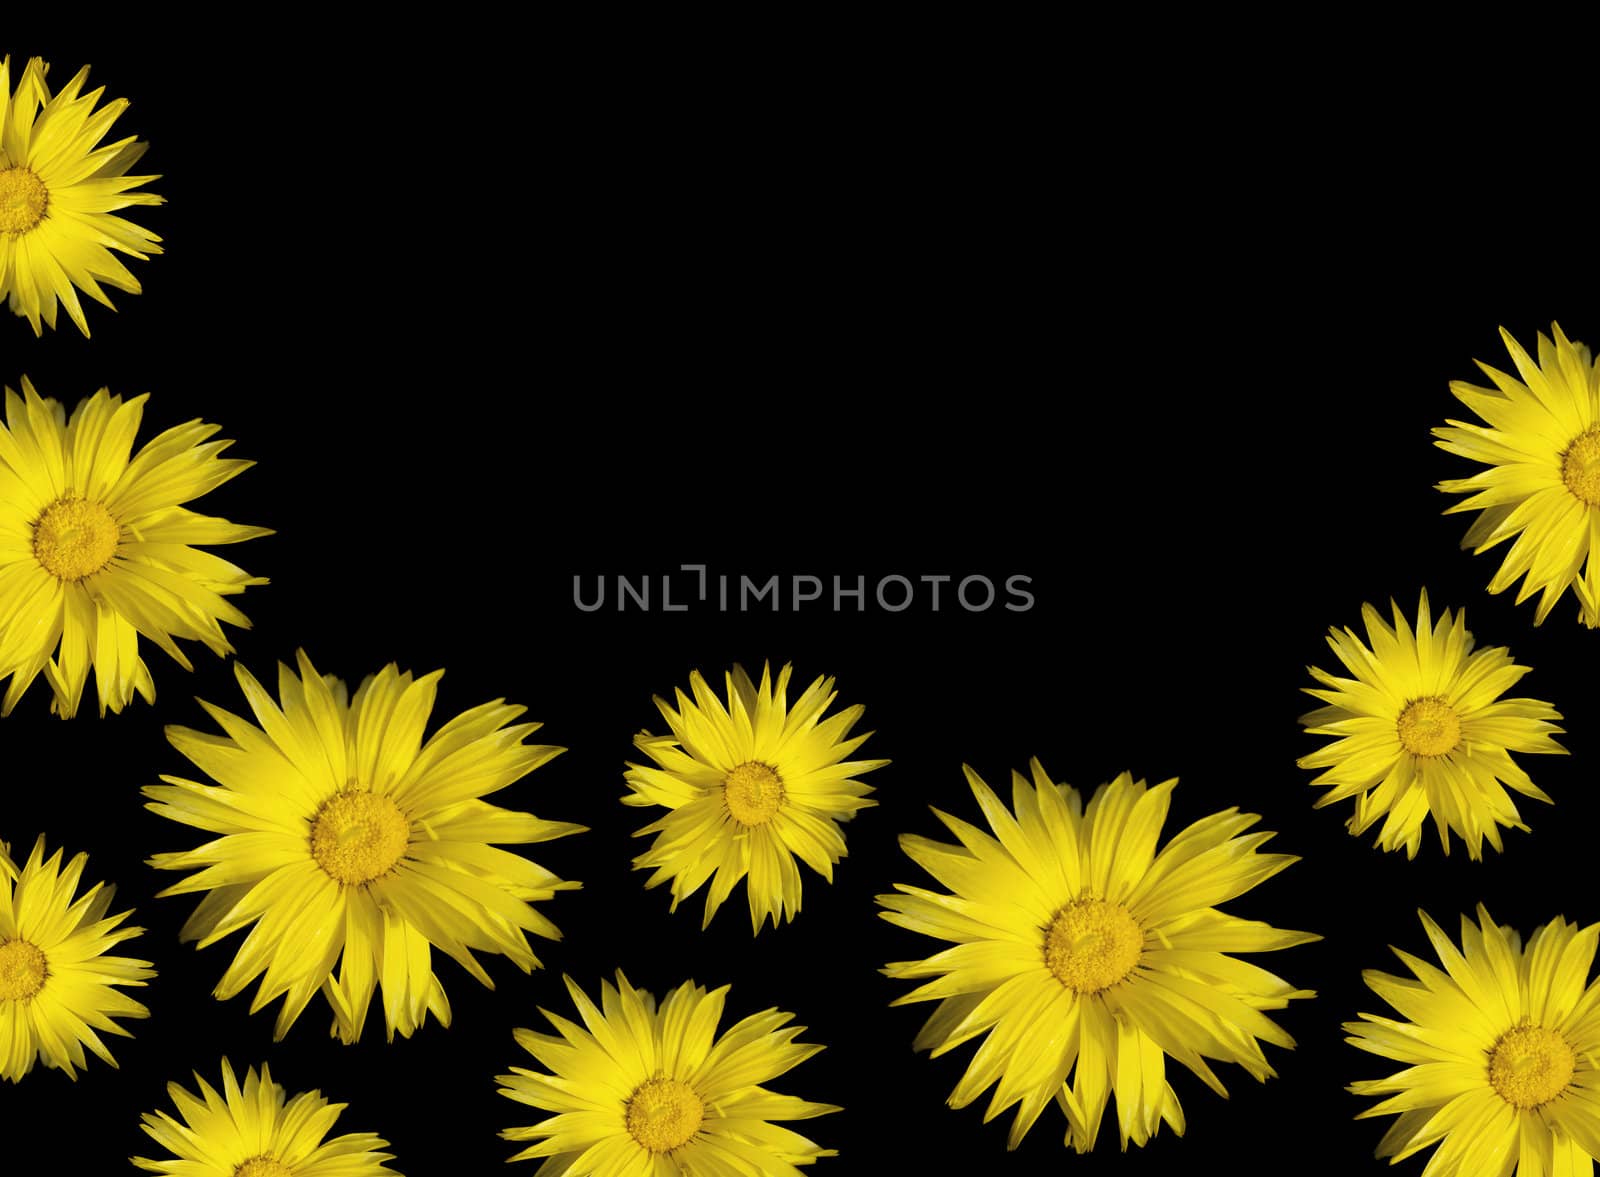 yellow floral background calendula sunflowers on black by sherj